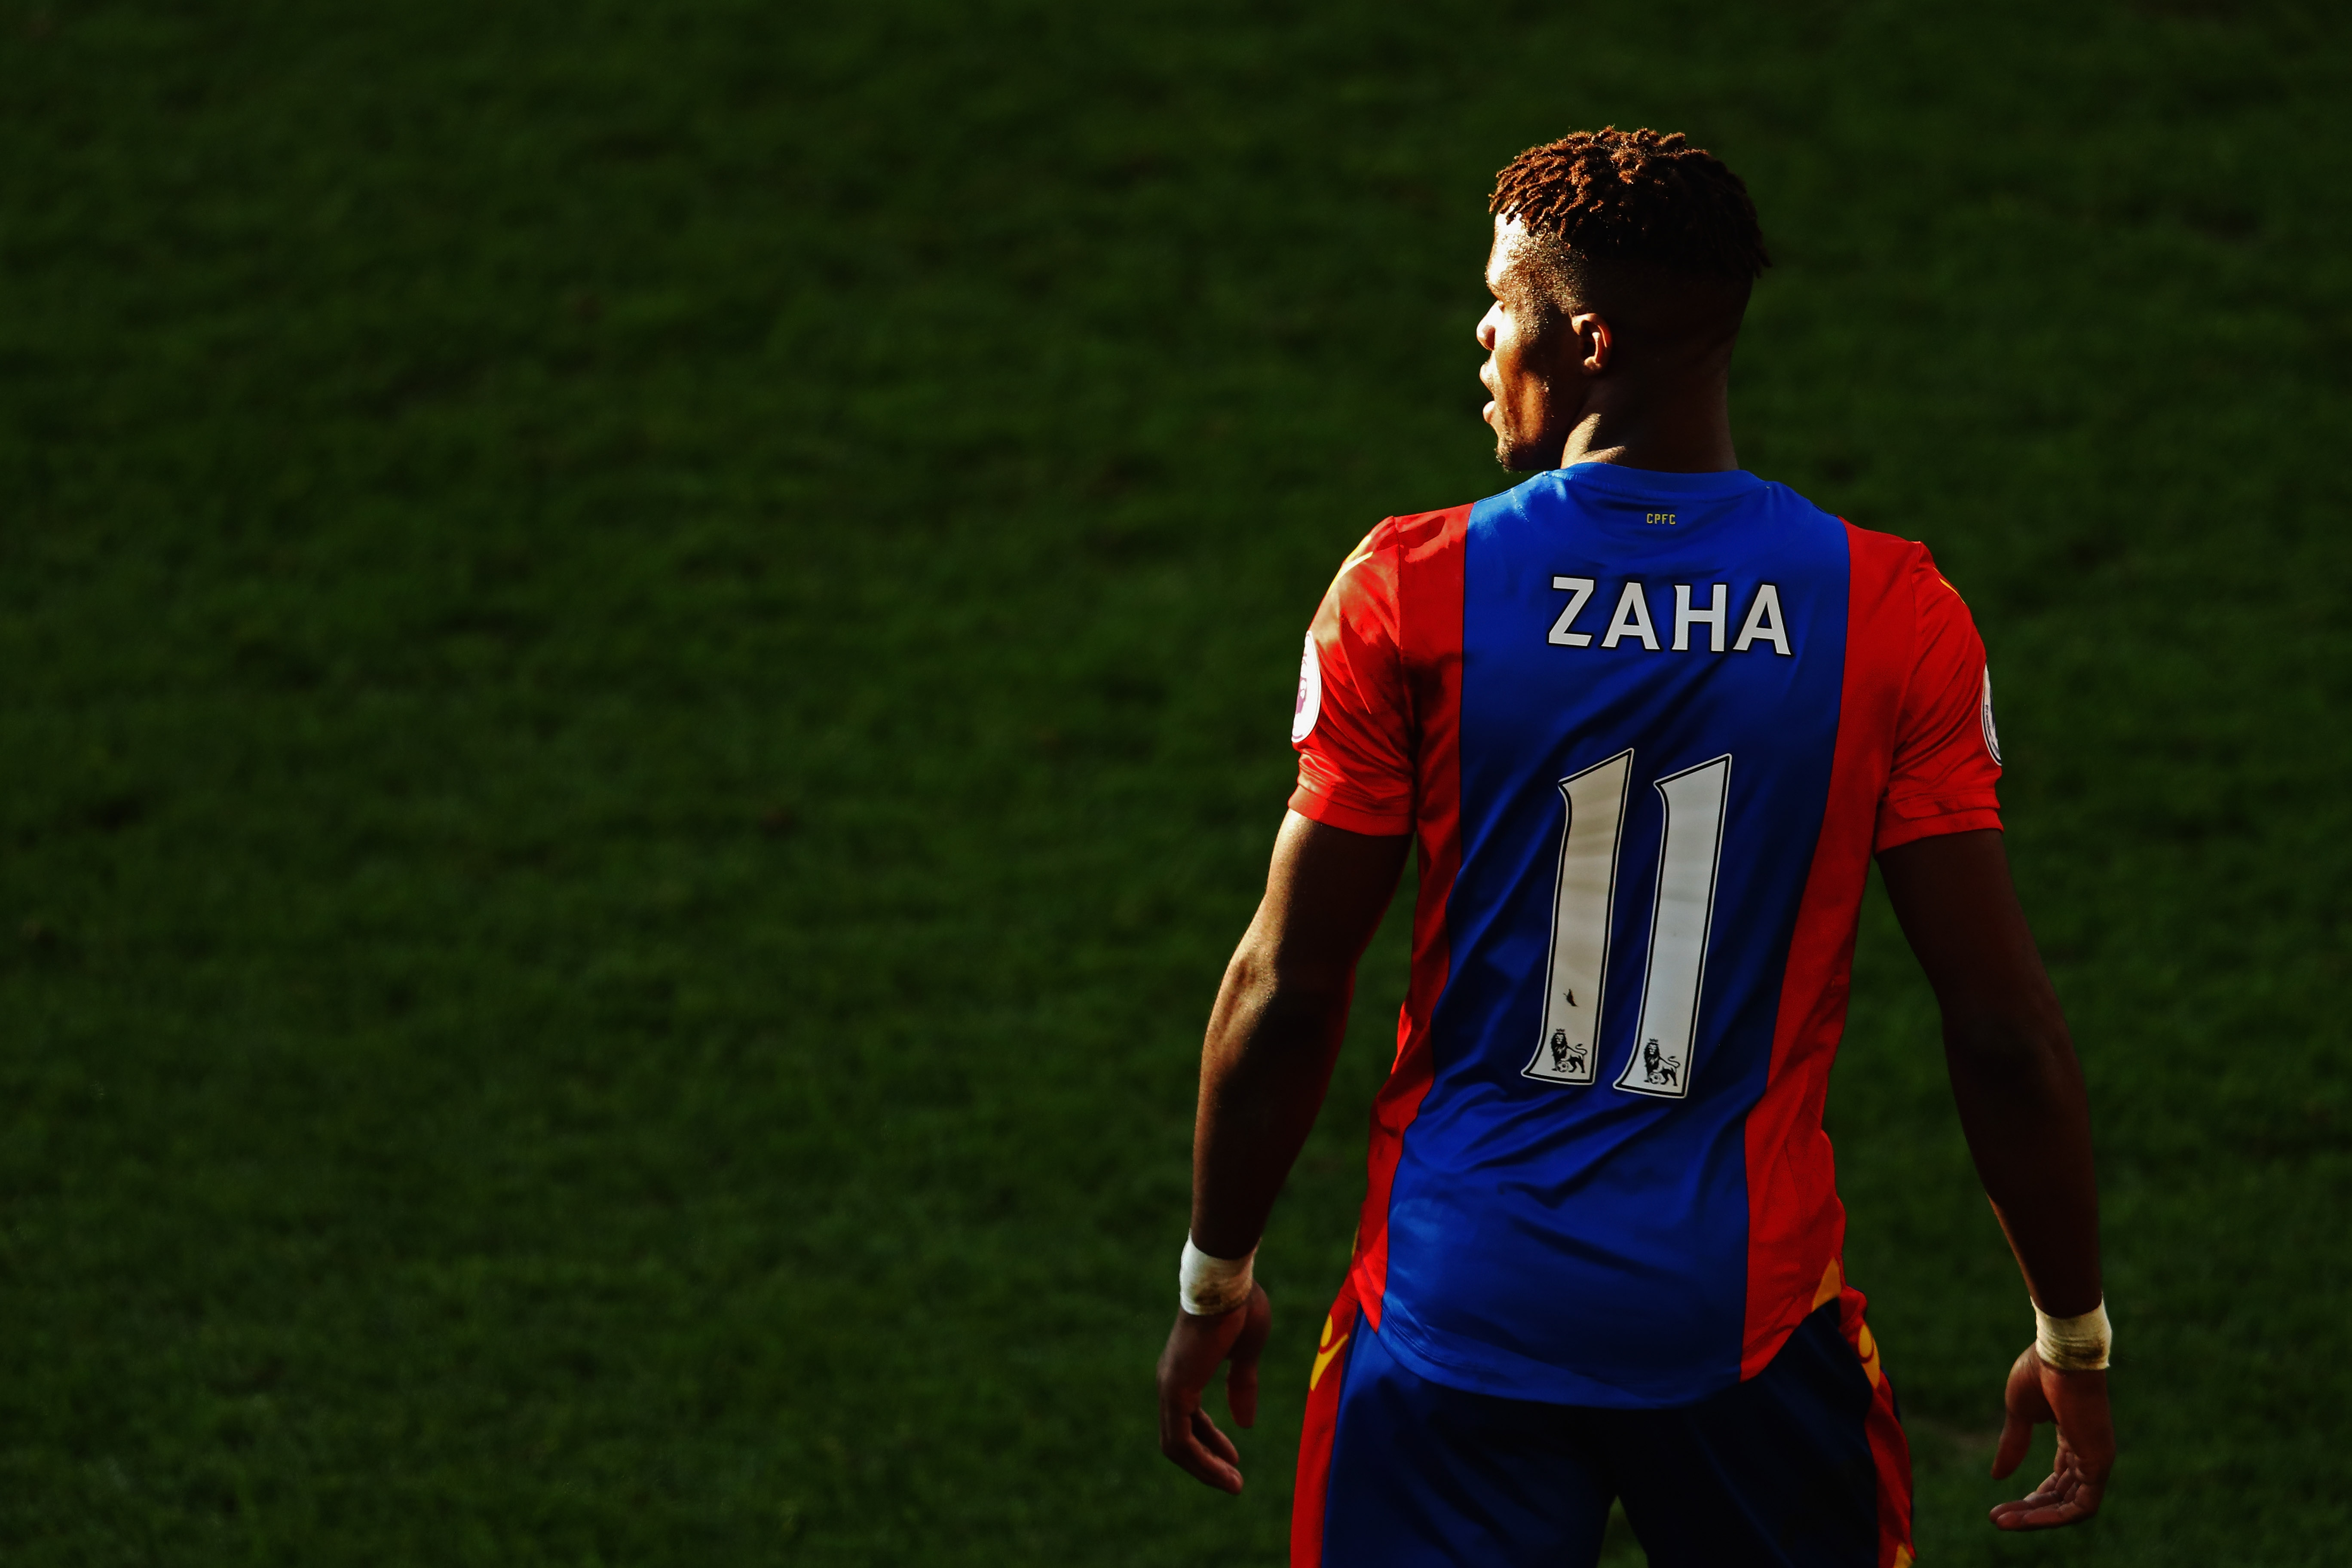 One-man army Wilfred Zaha (Photo by Dean Mouhtaropoulos/Getty Images)